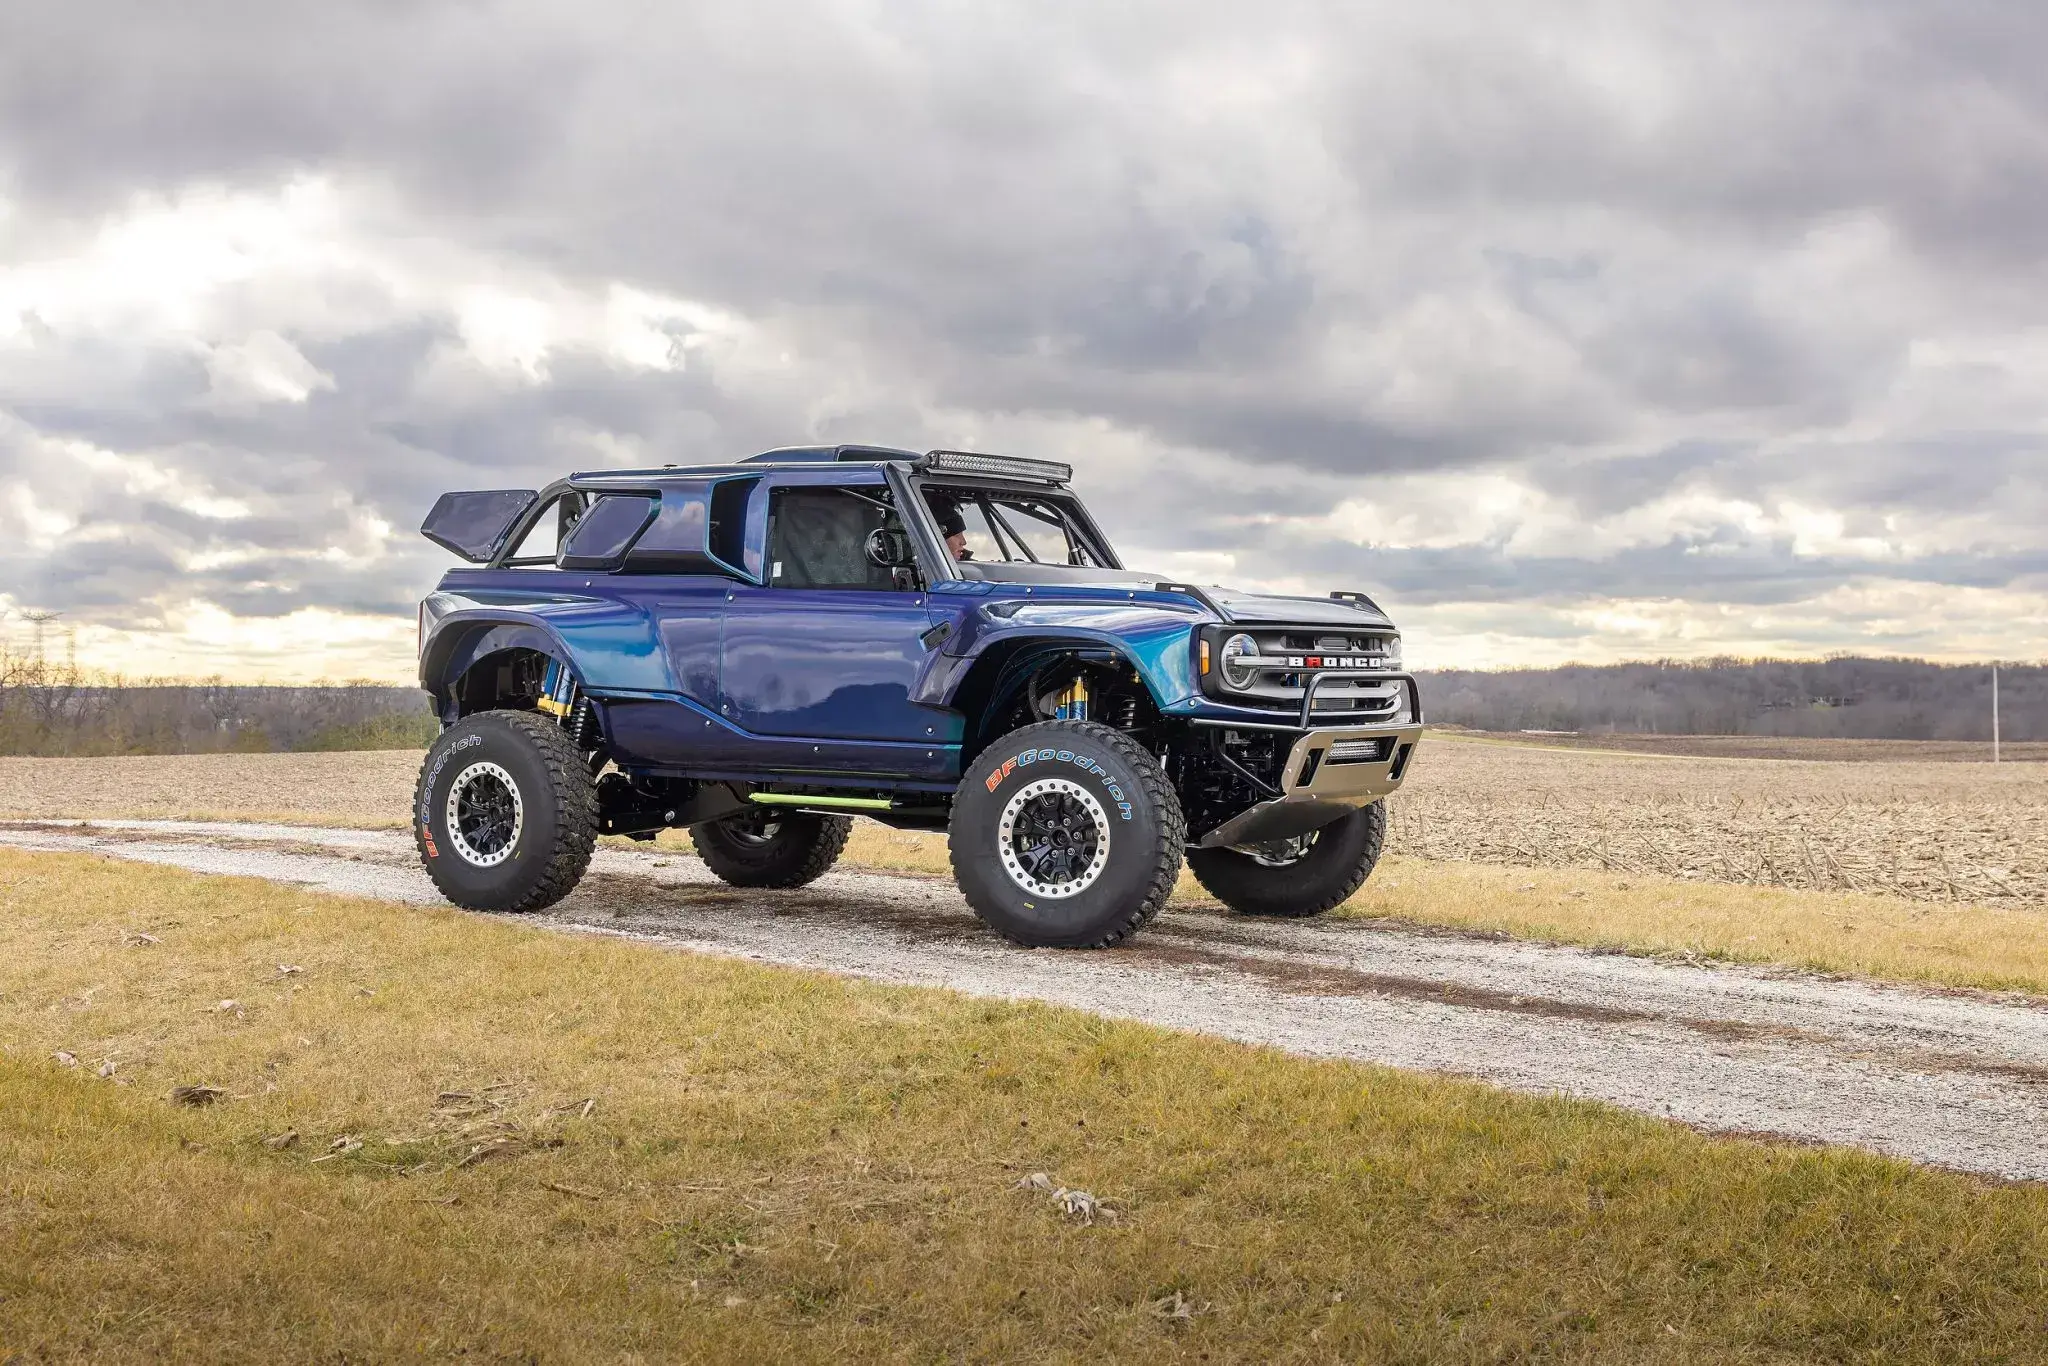 One of 50 extreme off-road racing Ford Broncos goes on sale